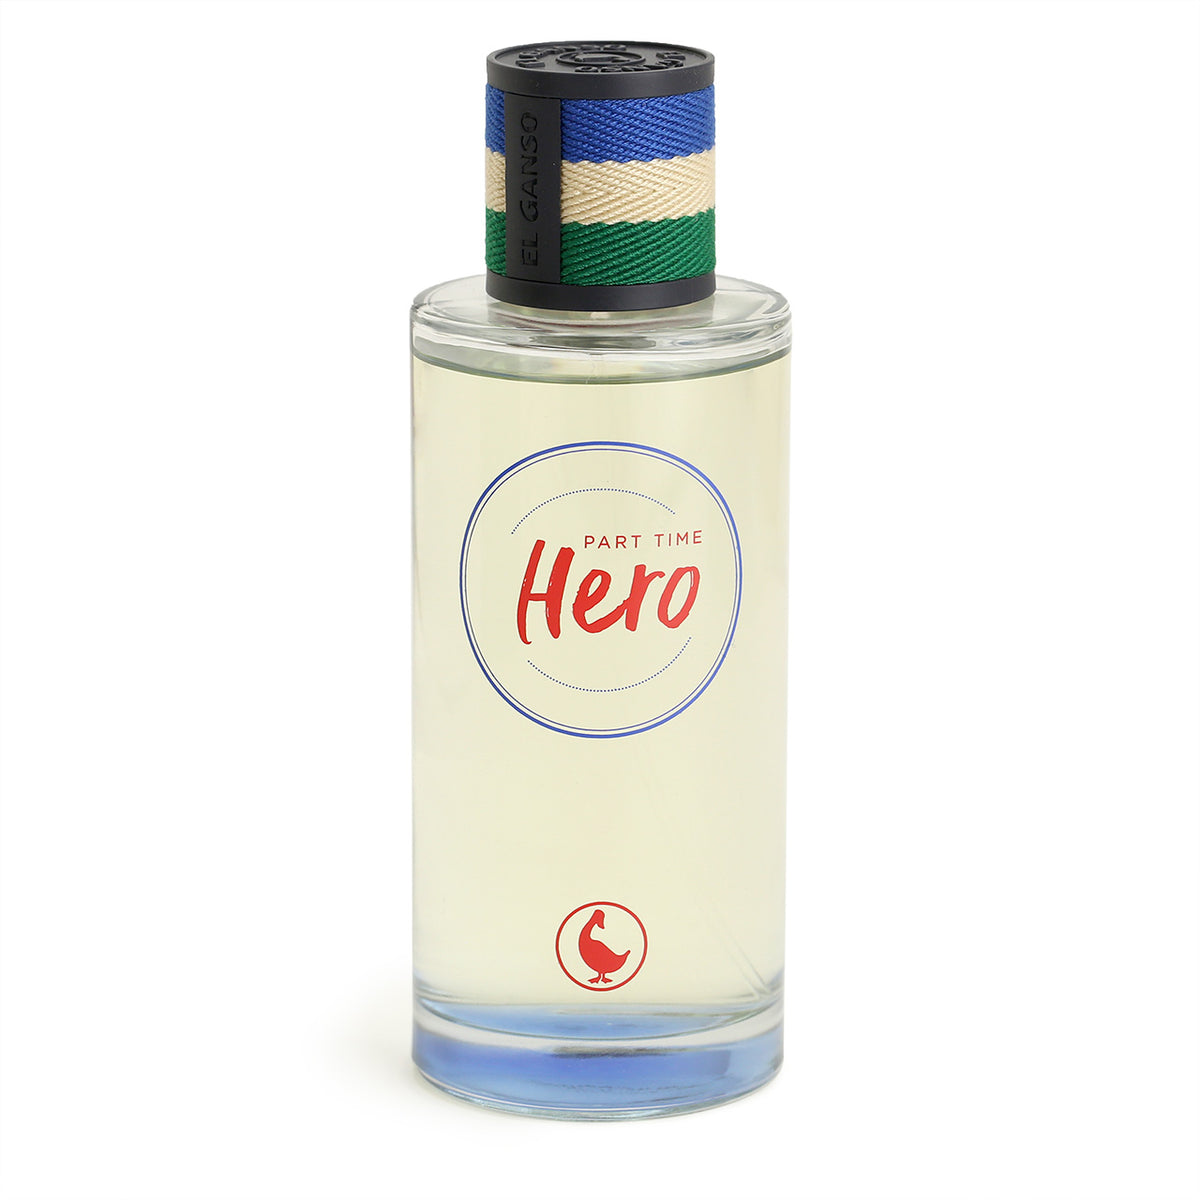 El Ganso Part Time Hero EDT bottle with blue, natural and green fabric wrapped cap.